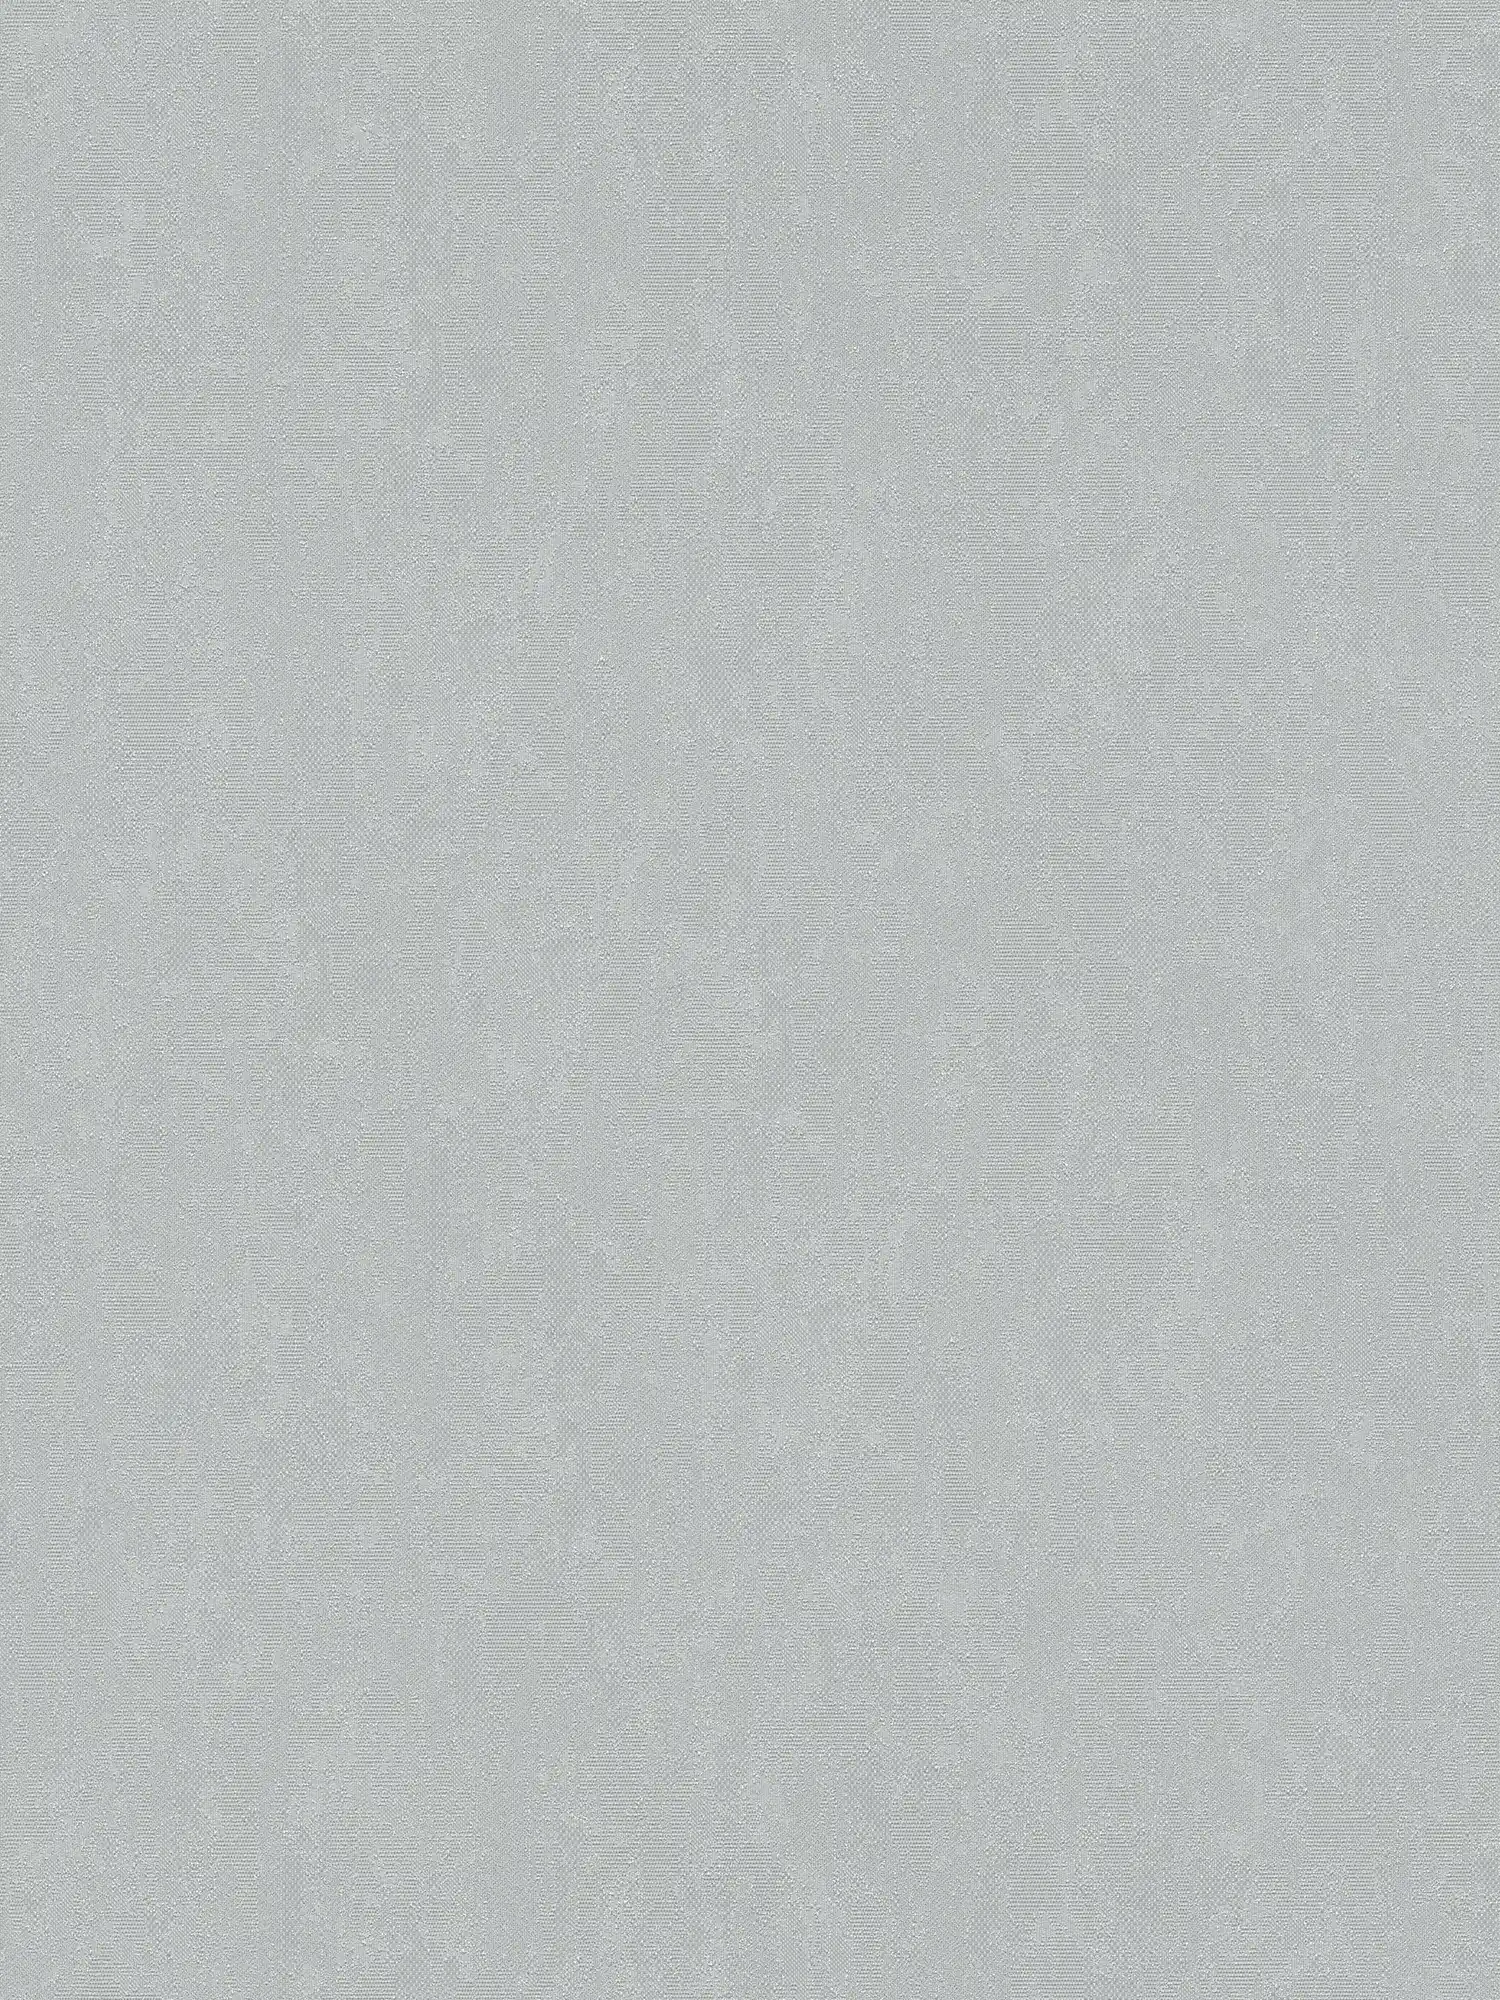 Plain wallpaper with texture effect - grey
